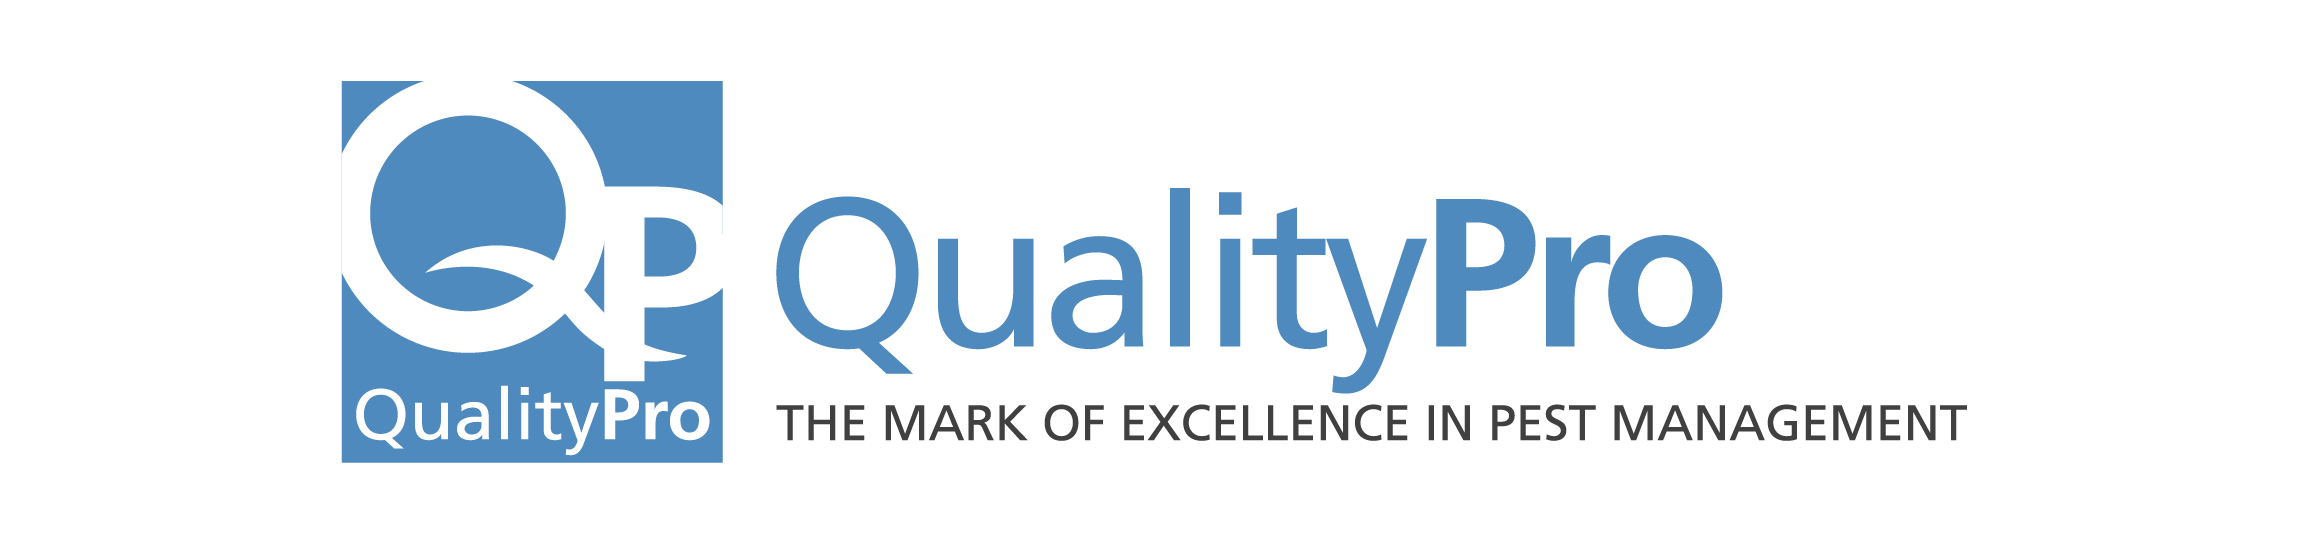 Quality Pro Certified